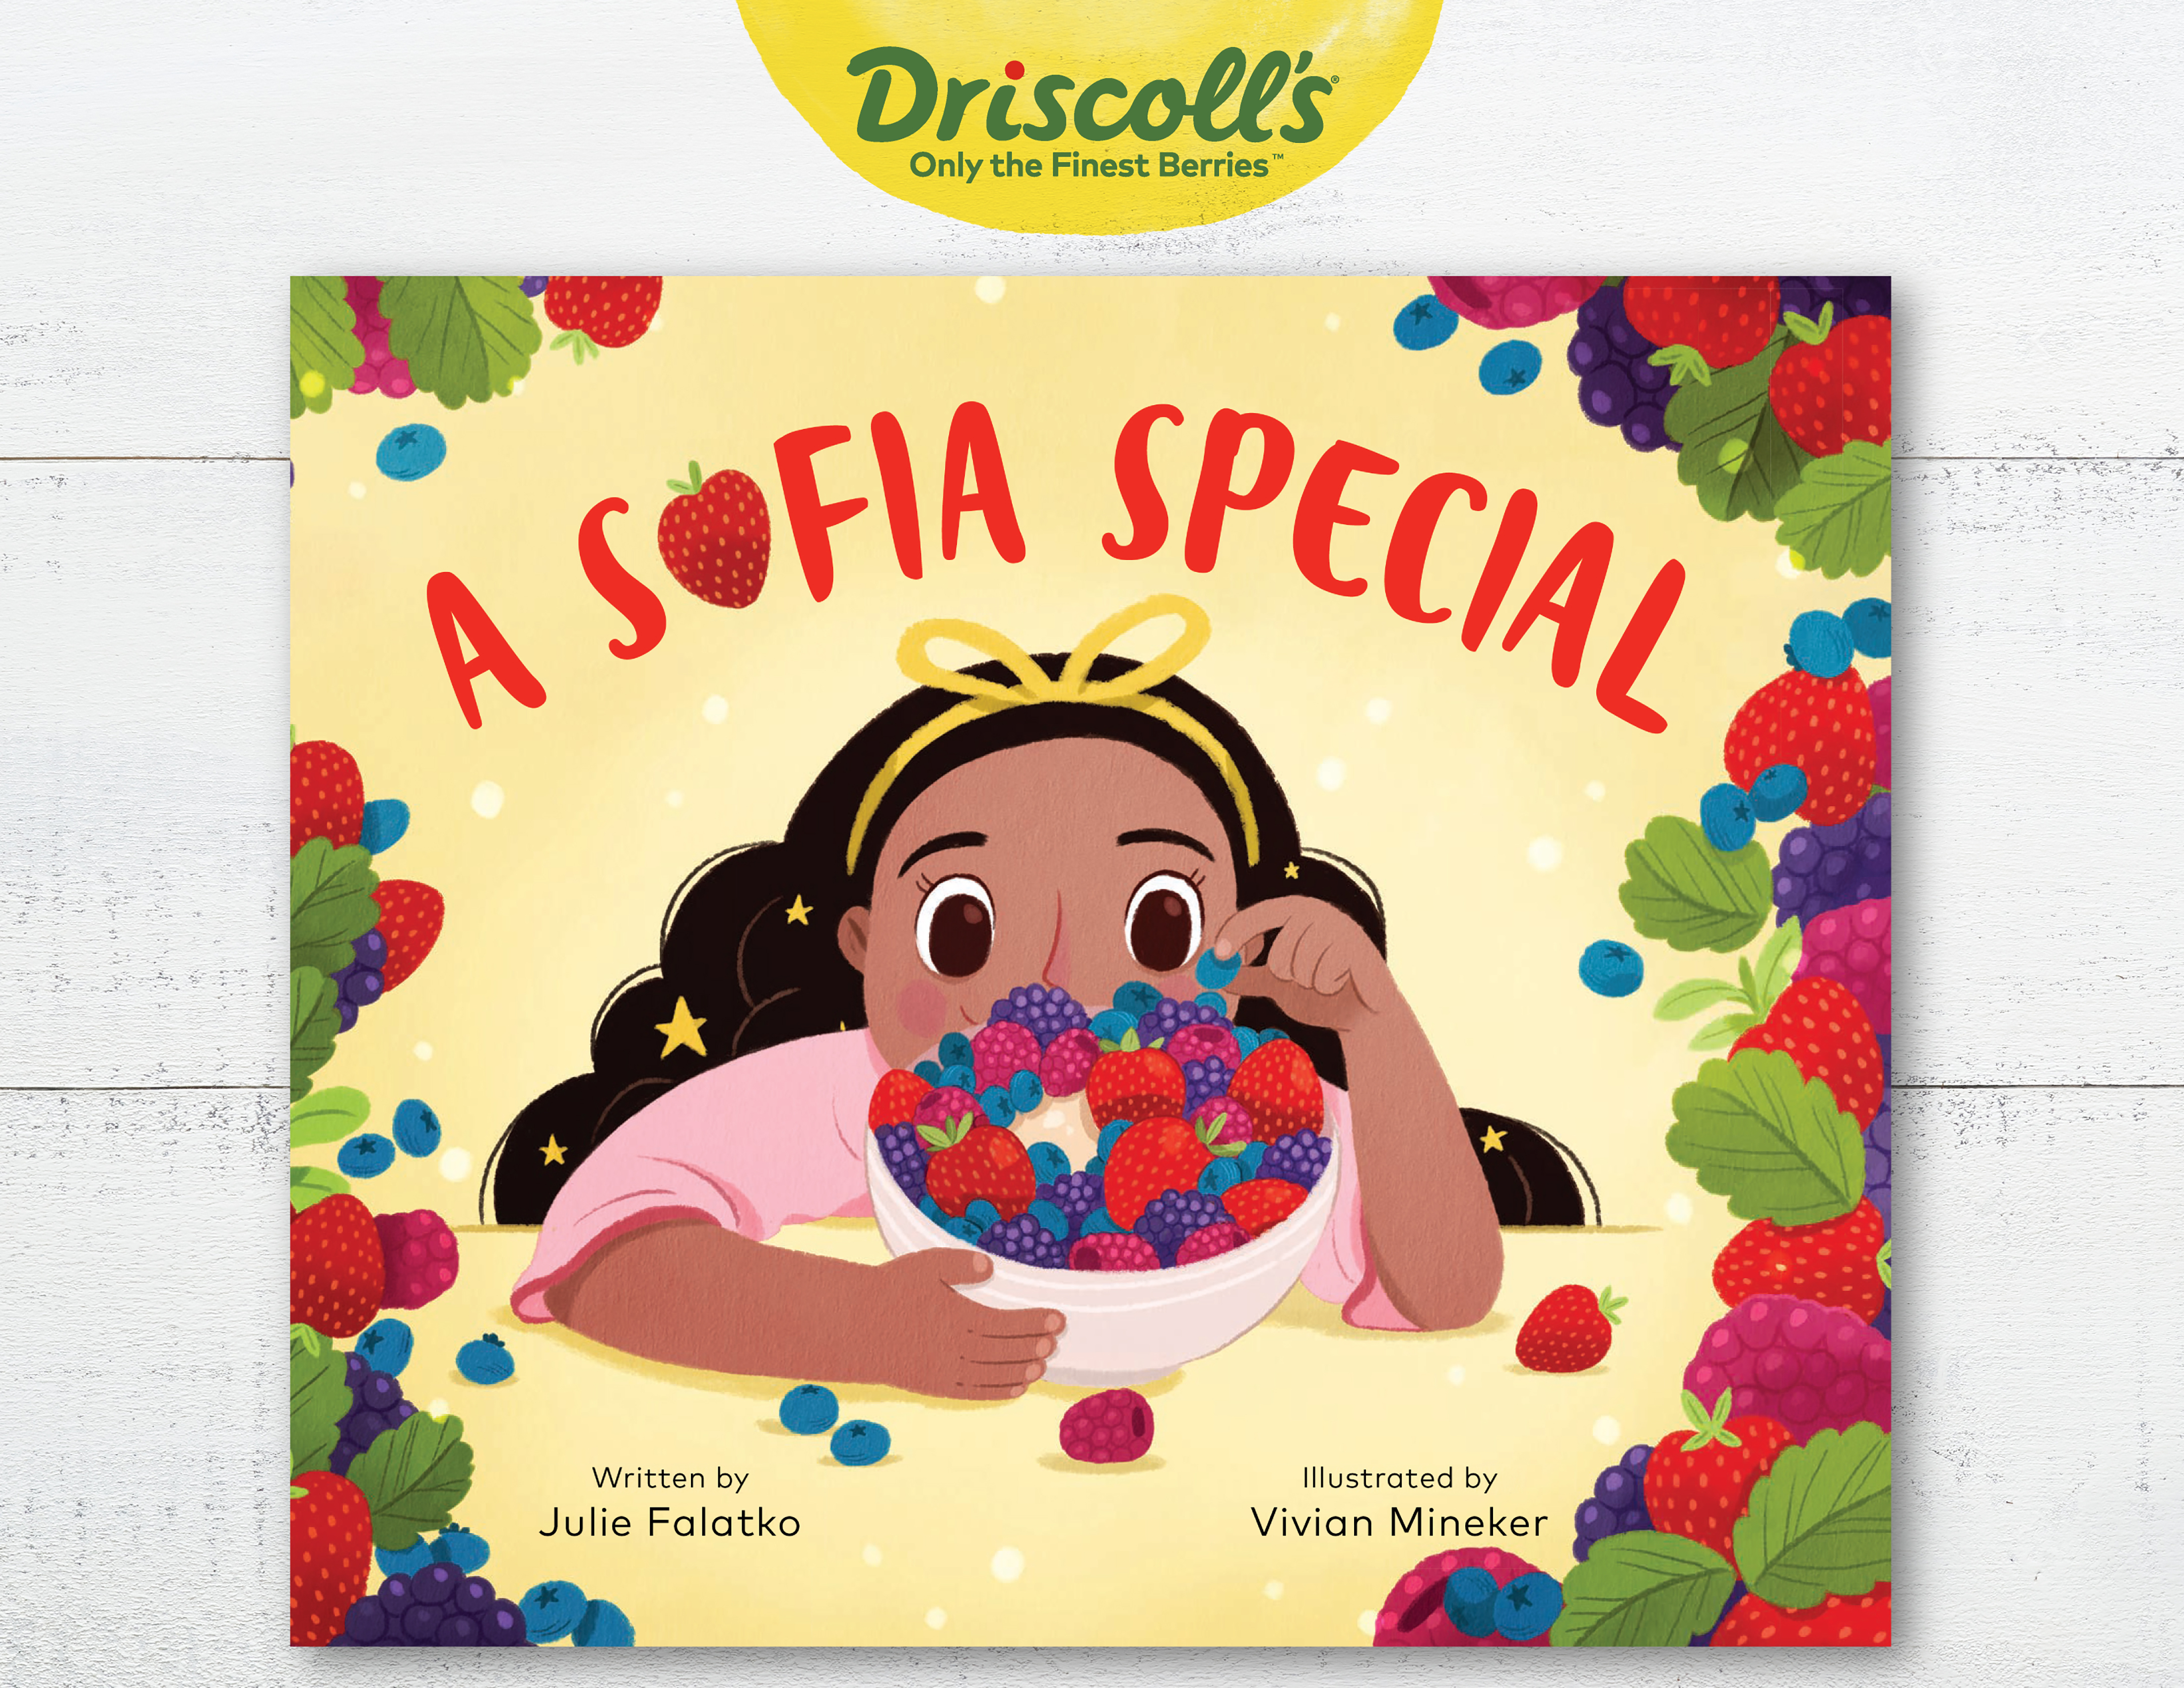 Driscoll's First Children's Book “A Sofia Special” Invites Young Readers to  Embrace Sweetness Worth Sharing(™) | Business Wire